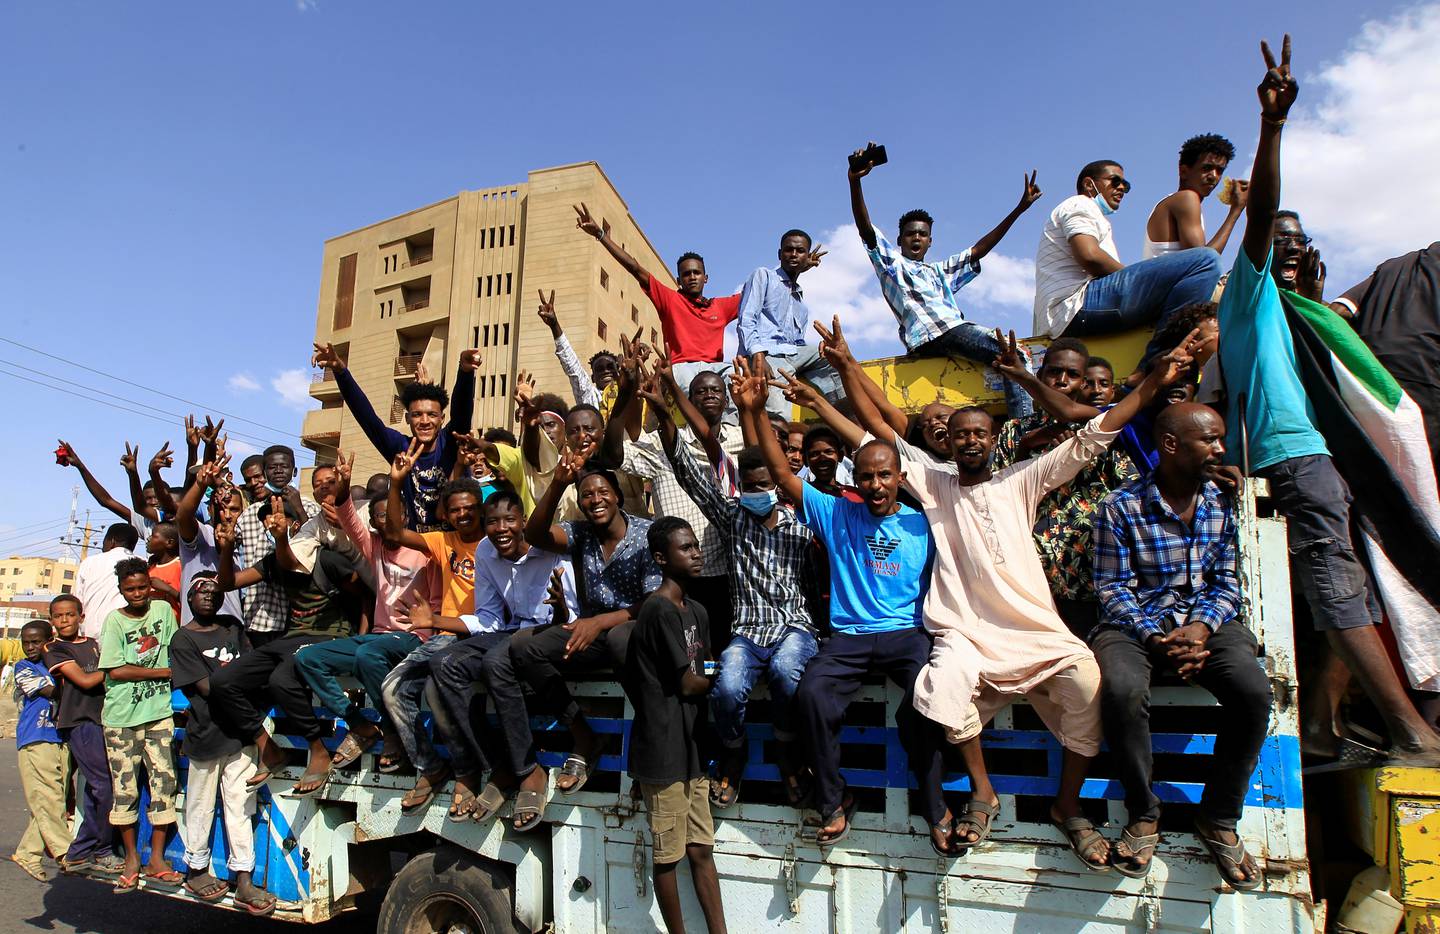 Protesters demonstrate against the Sudanese military's recent seizure of power. Reuters